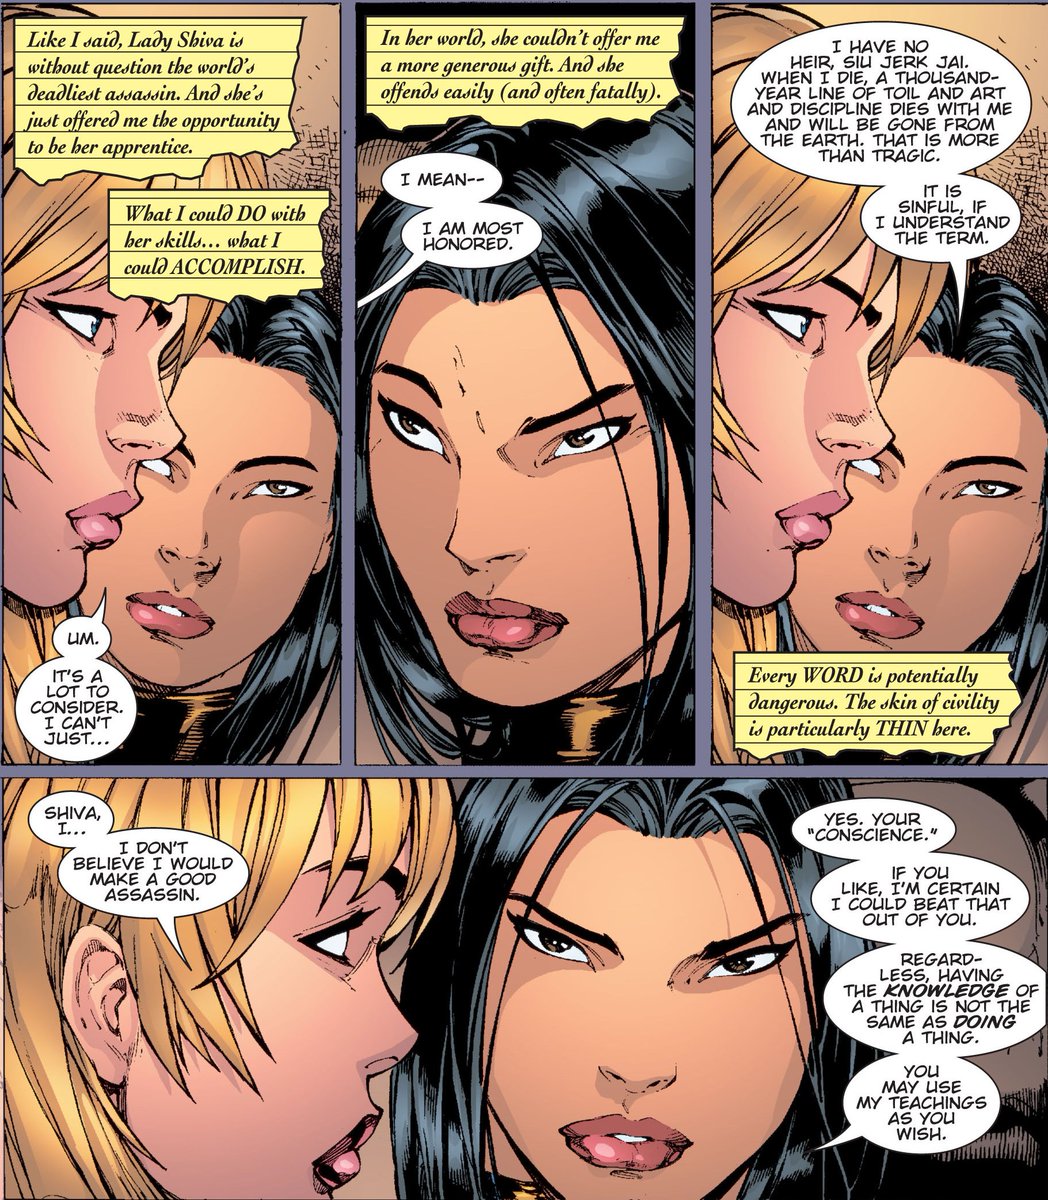 And sometimes it's about leaving something behind once she's gone.And here's the thing: none of these are "bad" motivations. They're all perfectly human and perfectly understandable.But I'd argue that's what makes them a bad fit for Lady Shiva.